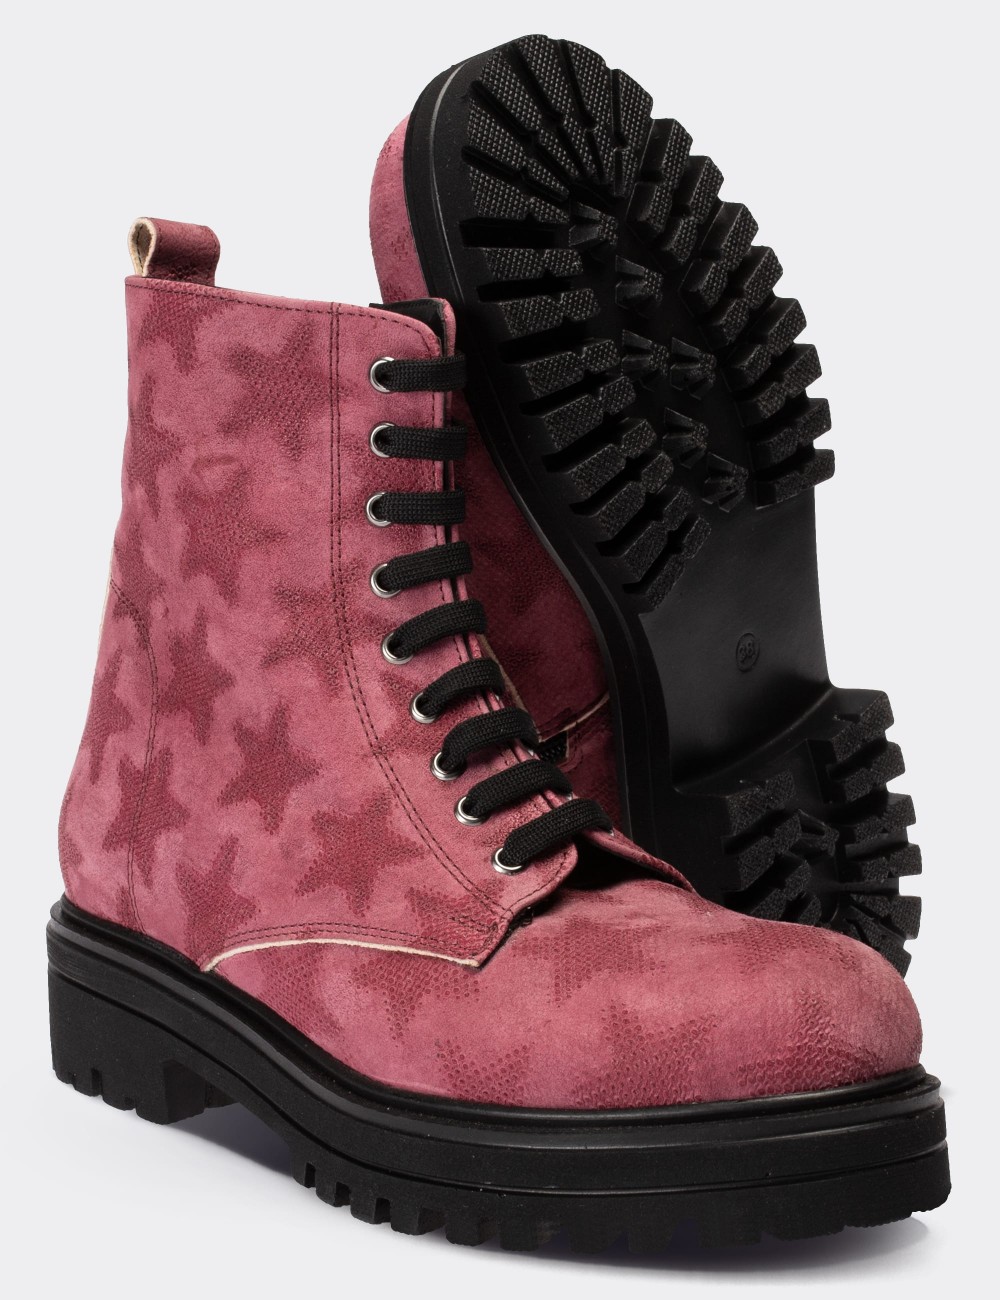 Pink Suede Leather Postal Boots - 01814ZPMBE03